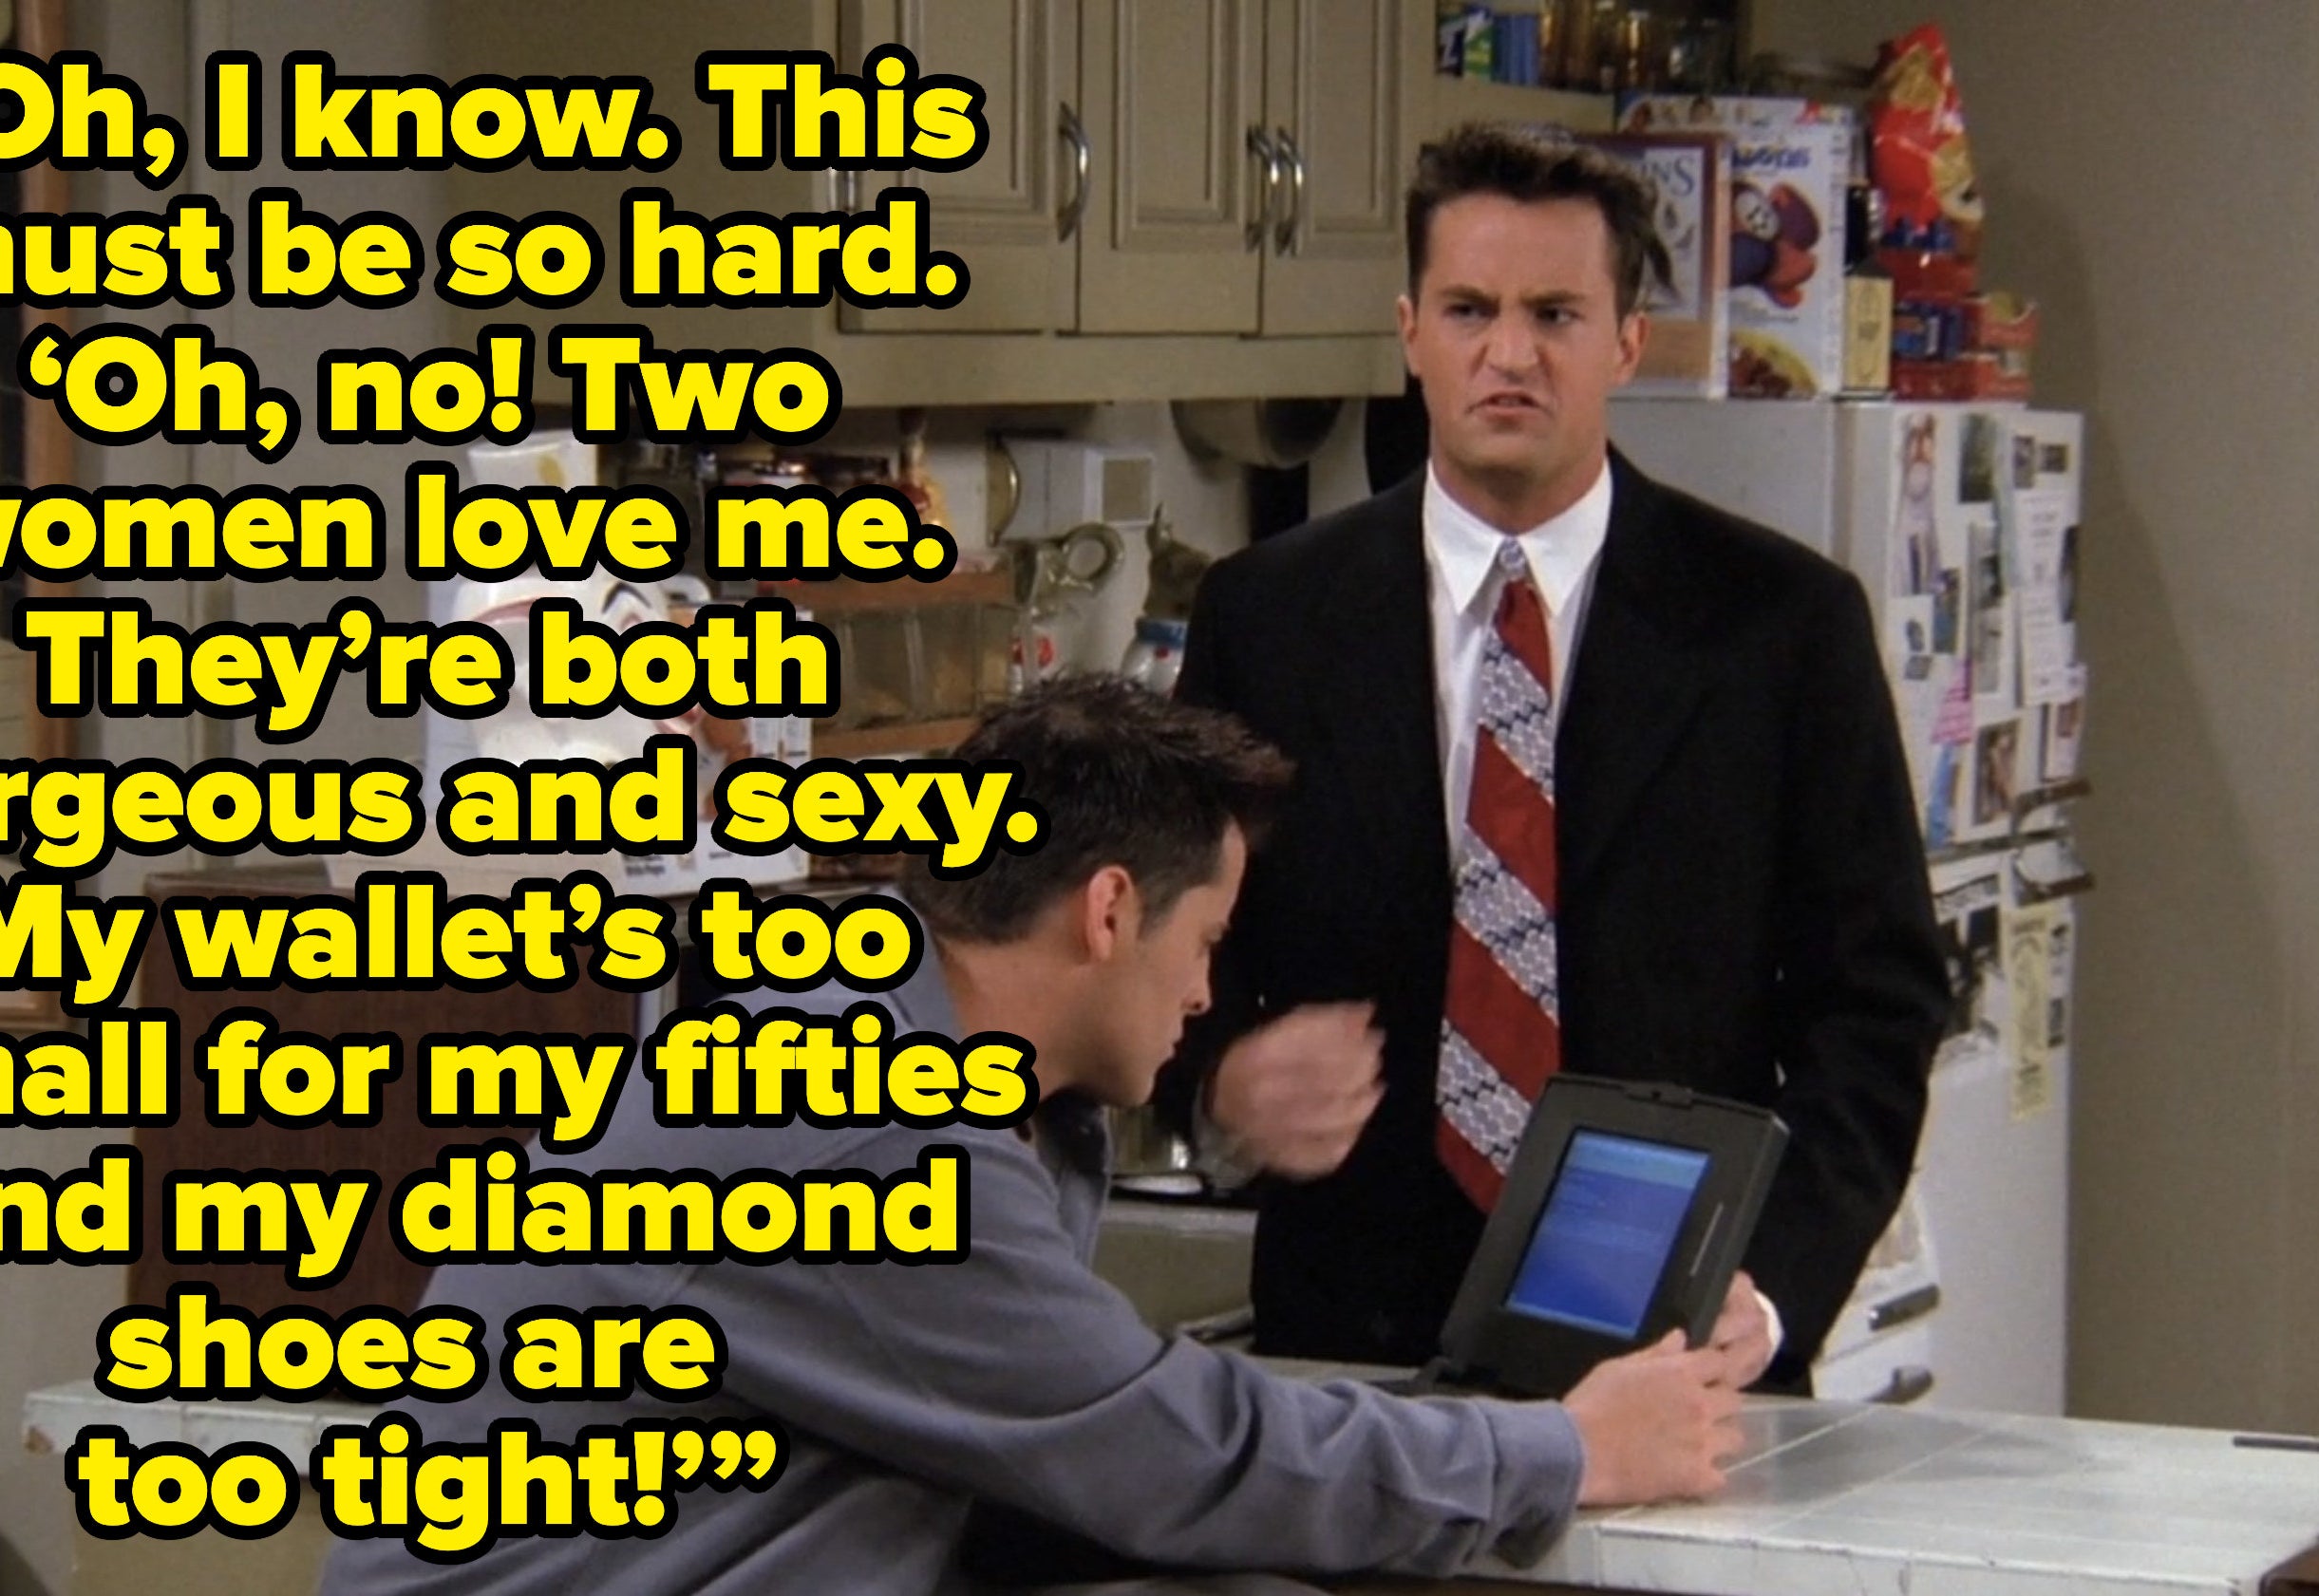 chandler telling ross “Oh, I know. This must be so hard. ‘Oh, no! Two women love me. They’re both gorgeous and sexy. My wallet’s too small for my fifties and my diamond shoes are too tight!’” on friends